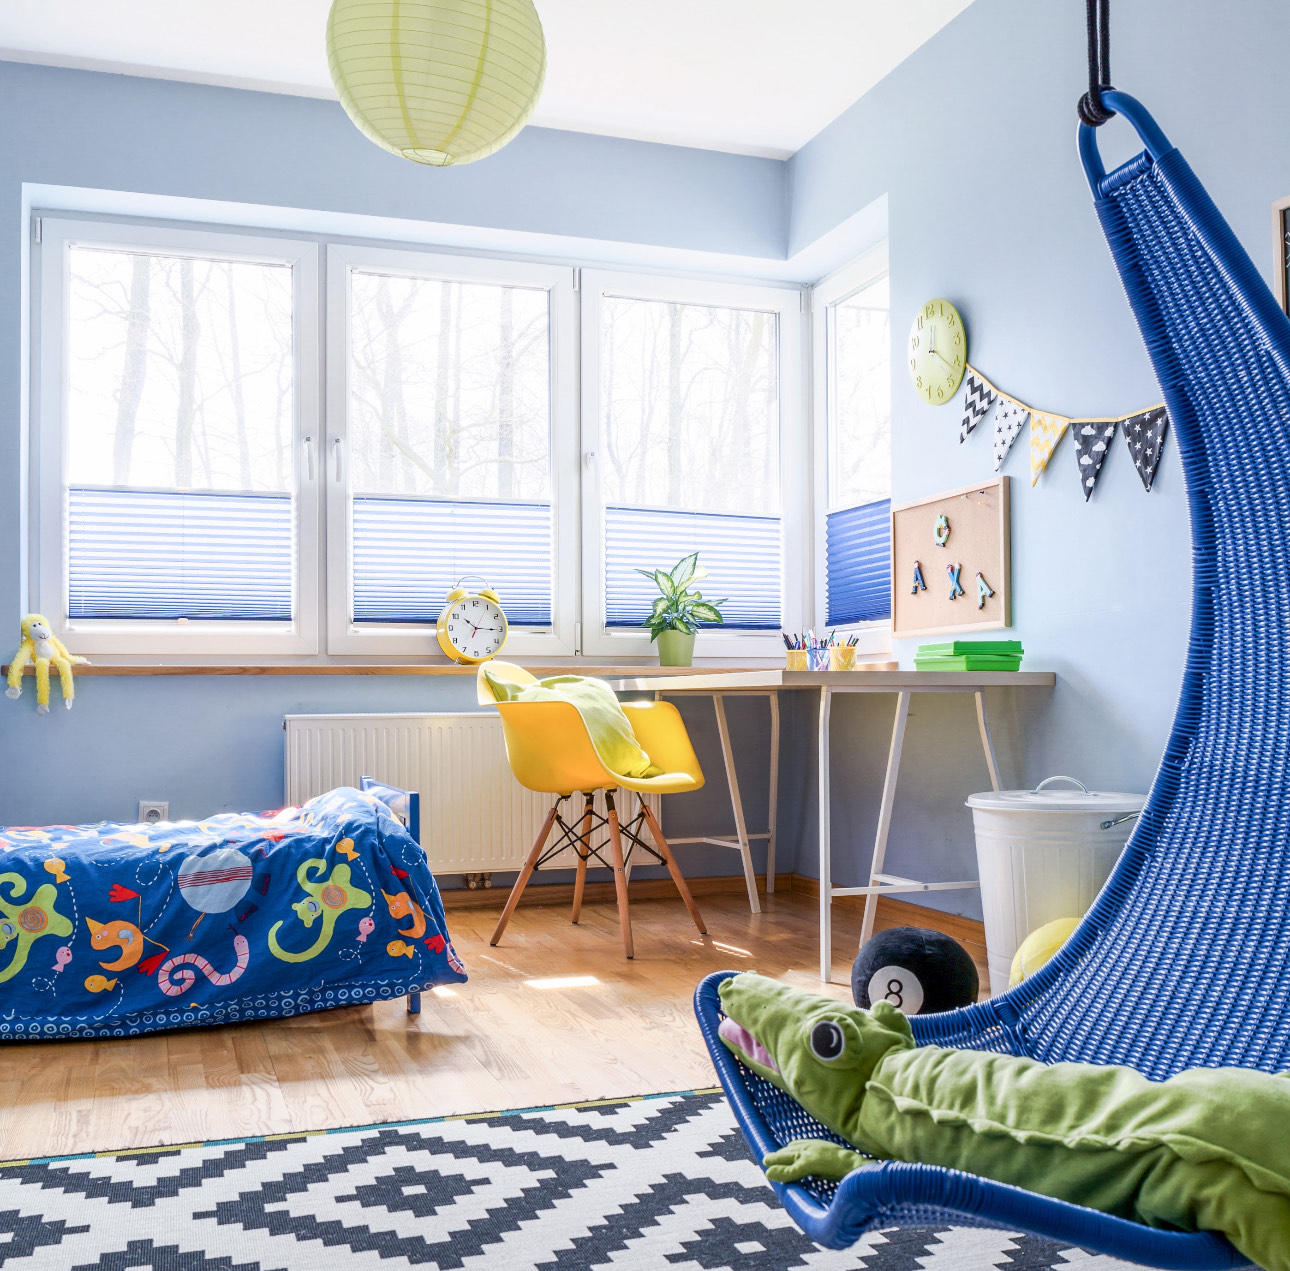 8 Tips for Painting Kids' Rooms: Creating a Fun and Functional Space